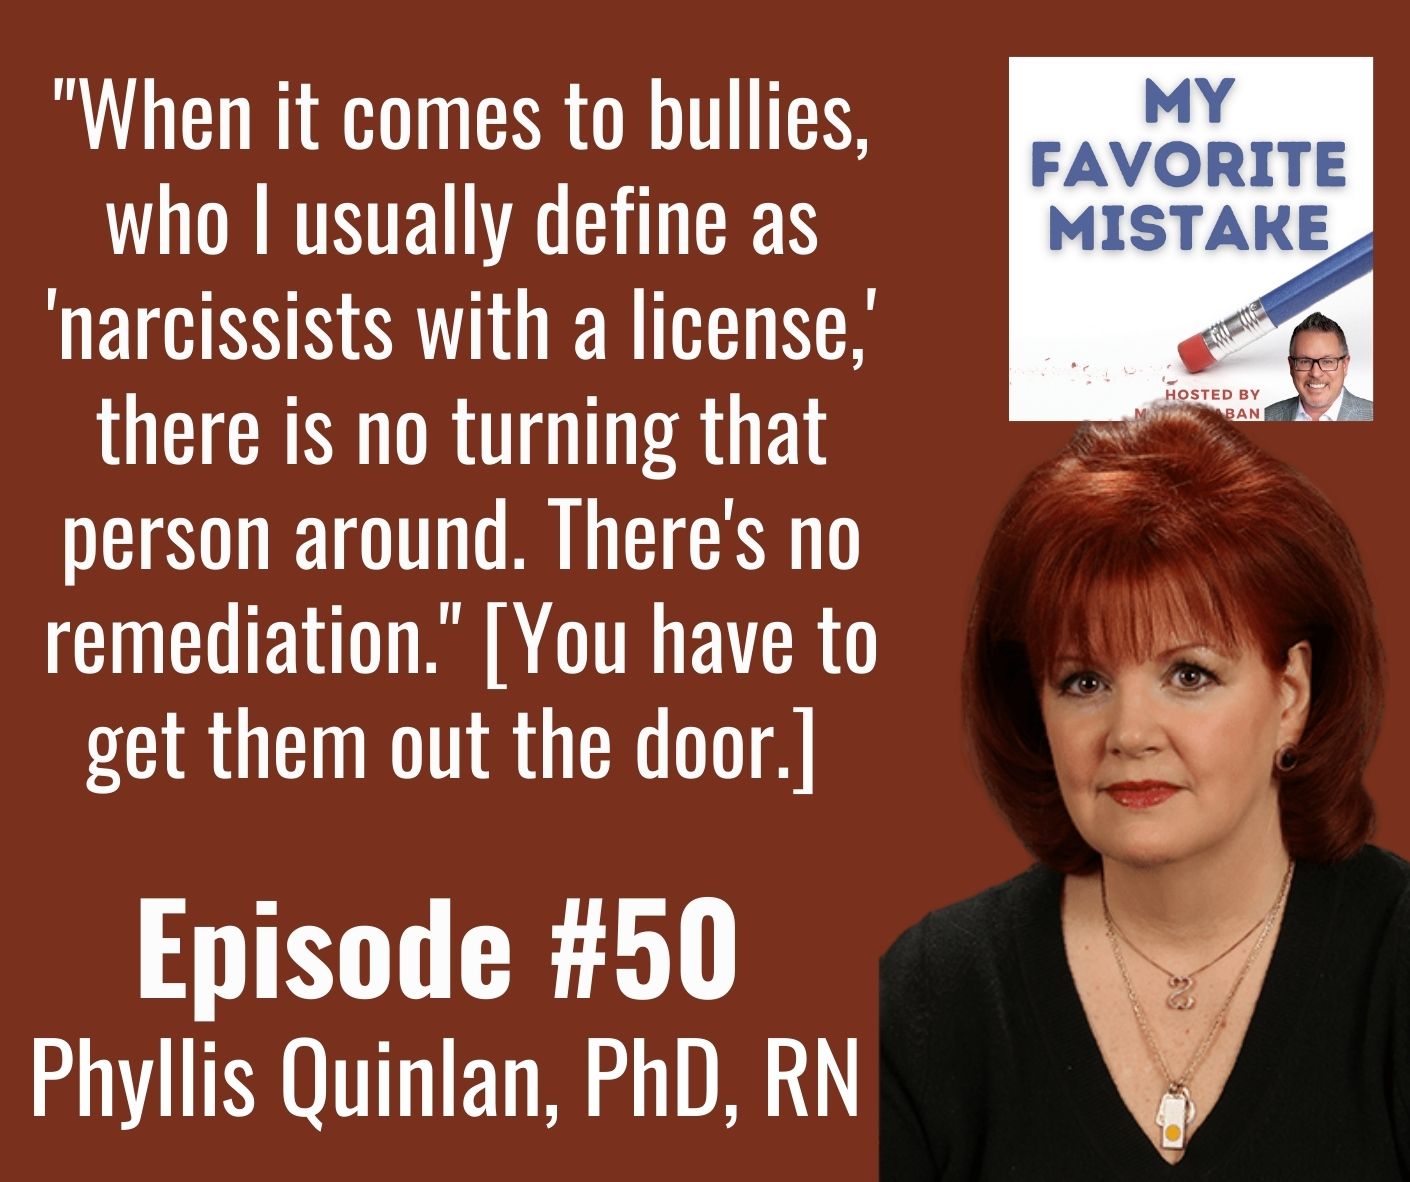 "When it comes to bullies, who I usually define as 'narcissists with a license,' there is no turning that person around. There's no remediation." [You have to get them out the door.] 